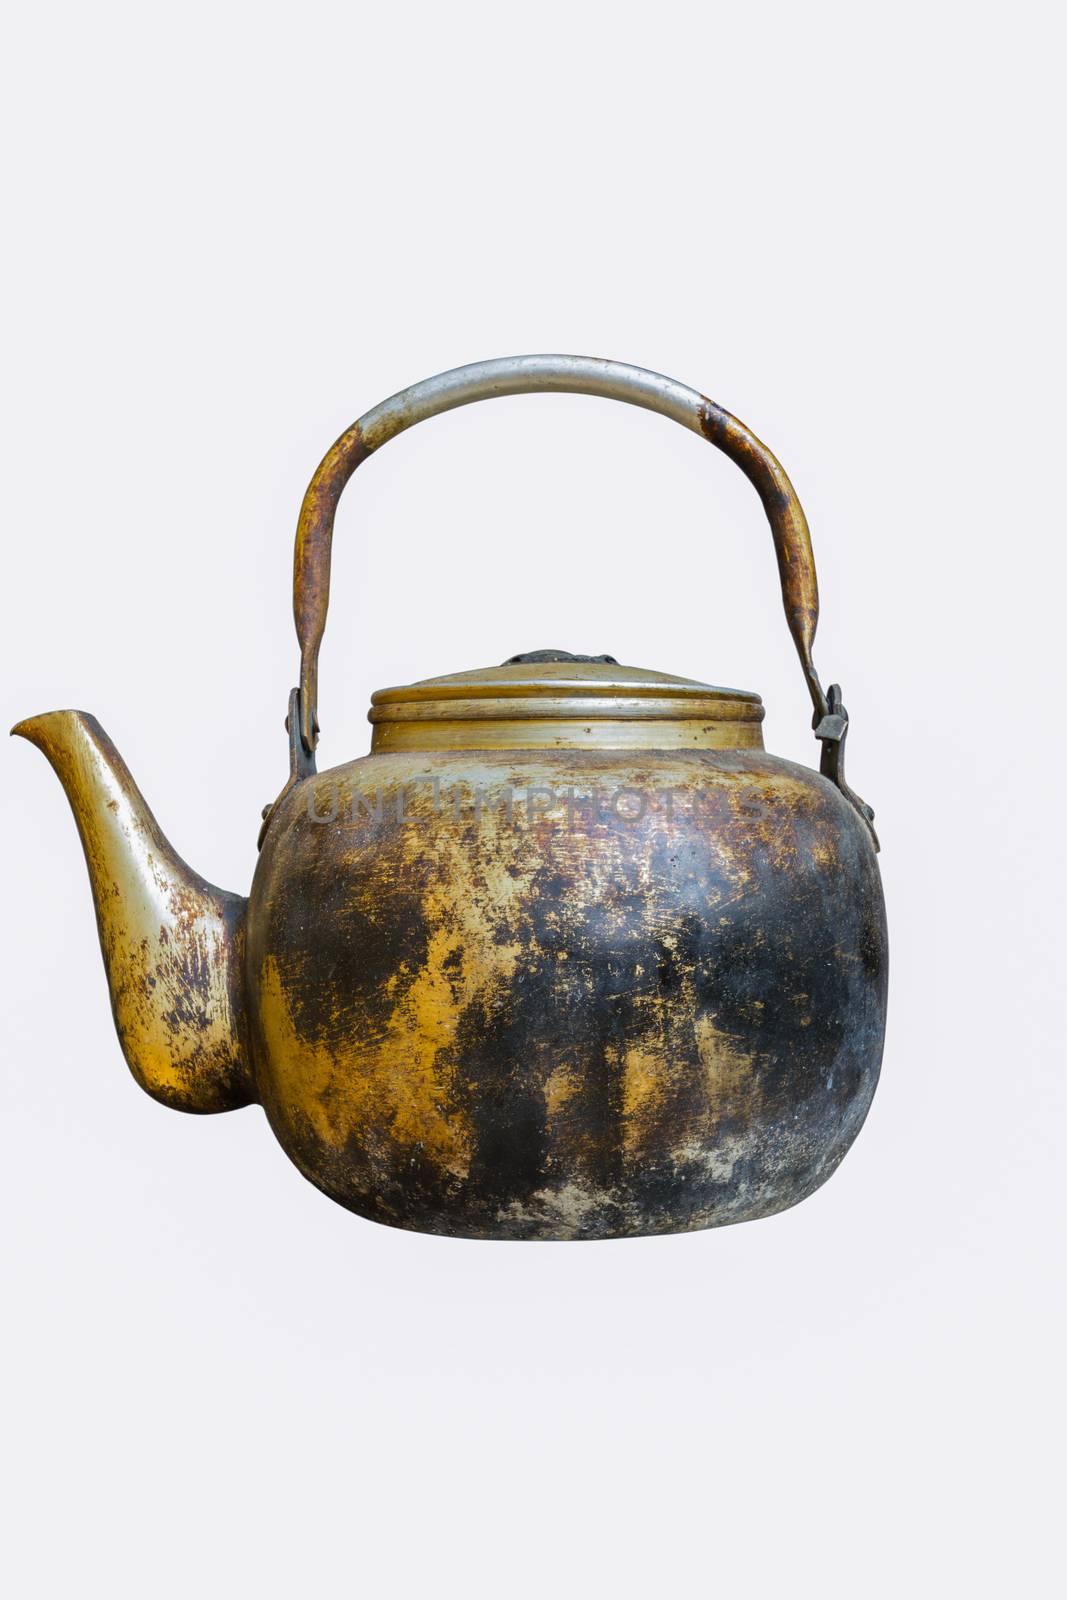 old vintage copper kettle isolated on white with clipping path